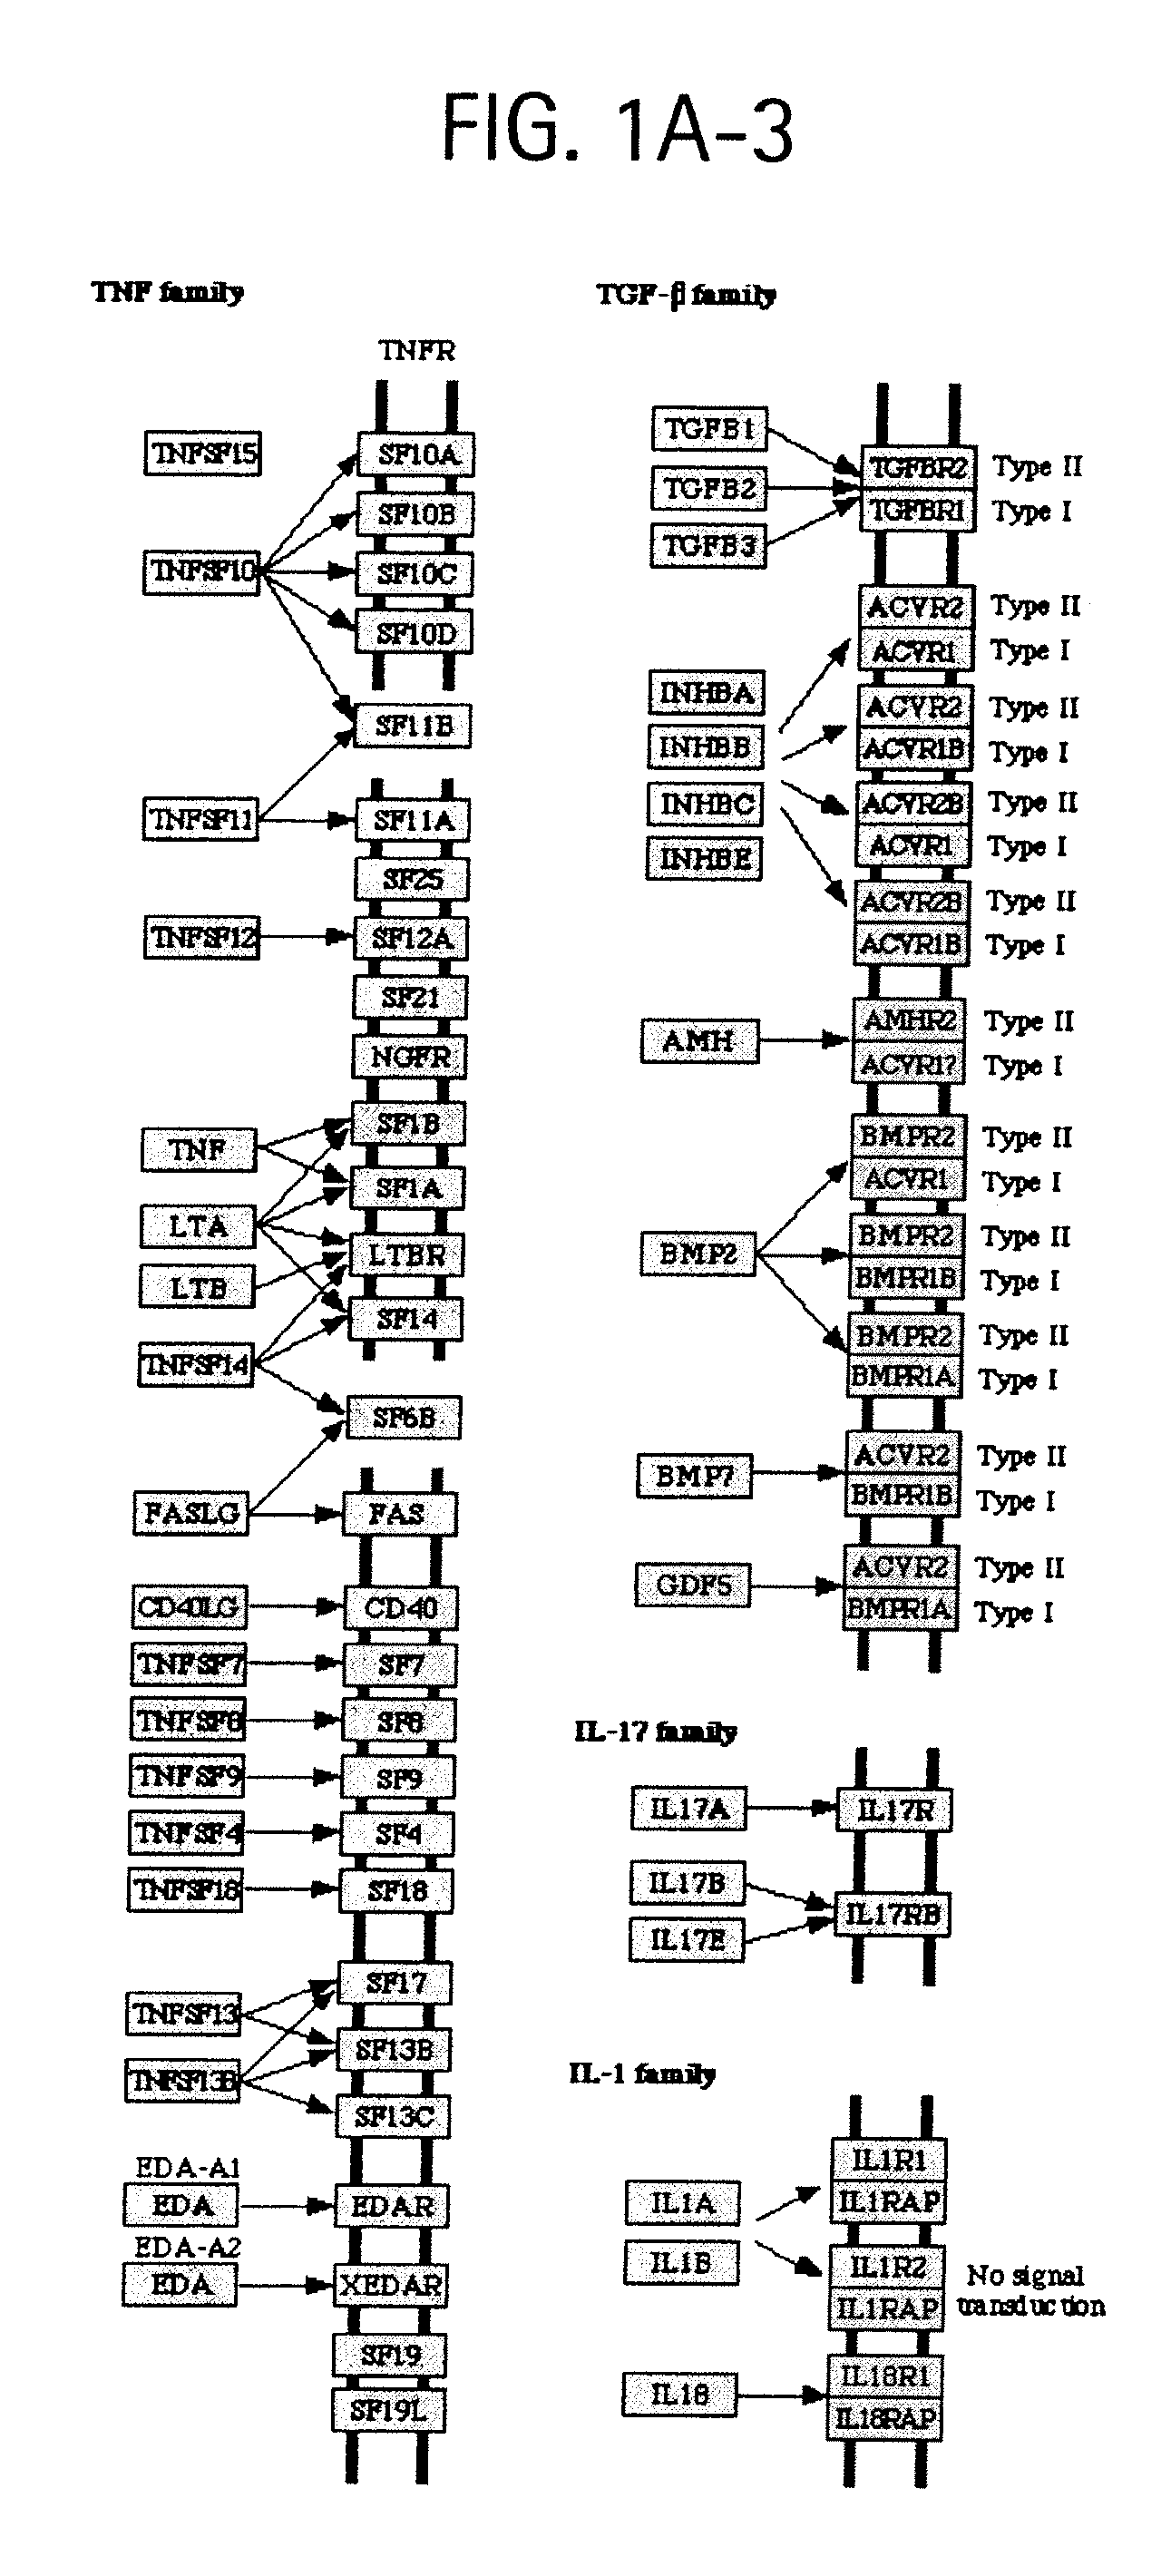 Osteoporosis associated markers and methods of use thereof